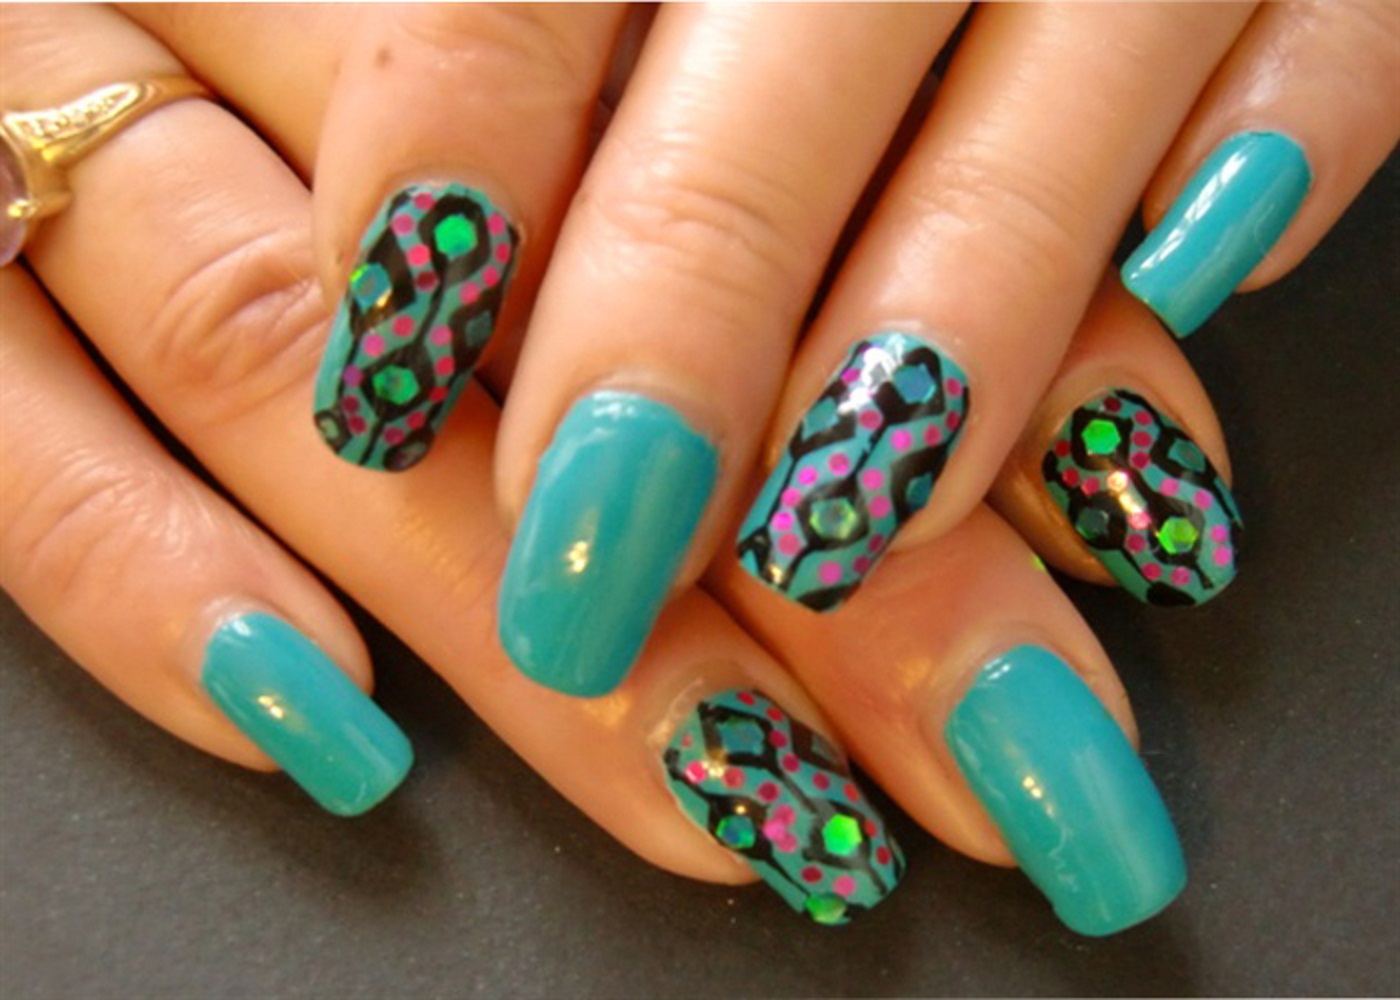 5. "Nail Art Design Techniques: Step-by-Step Instructions for 25 Beautiful Designs" - wide 8